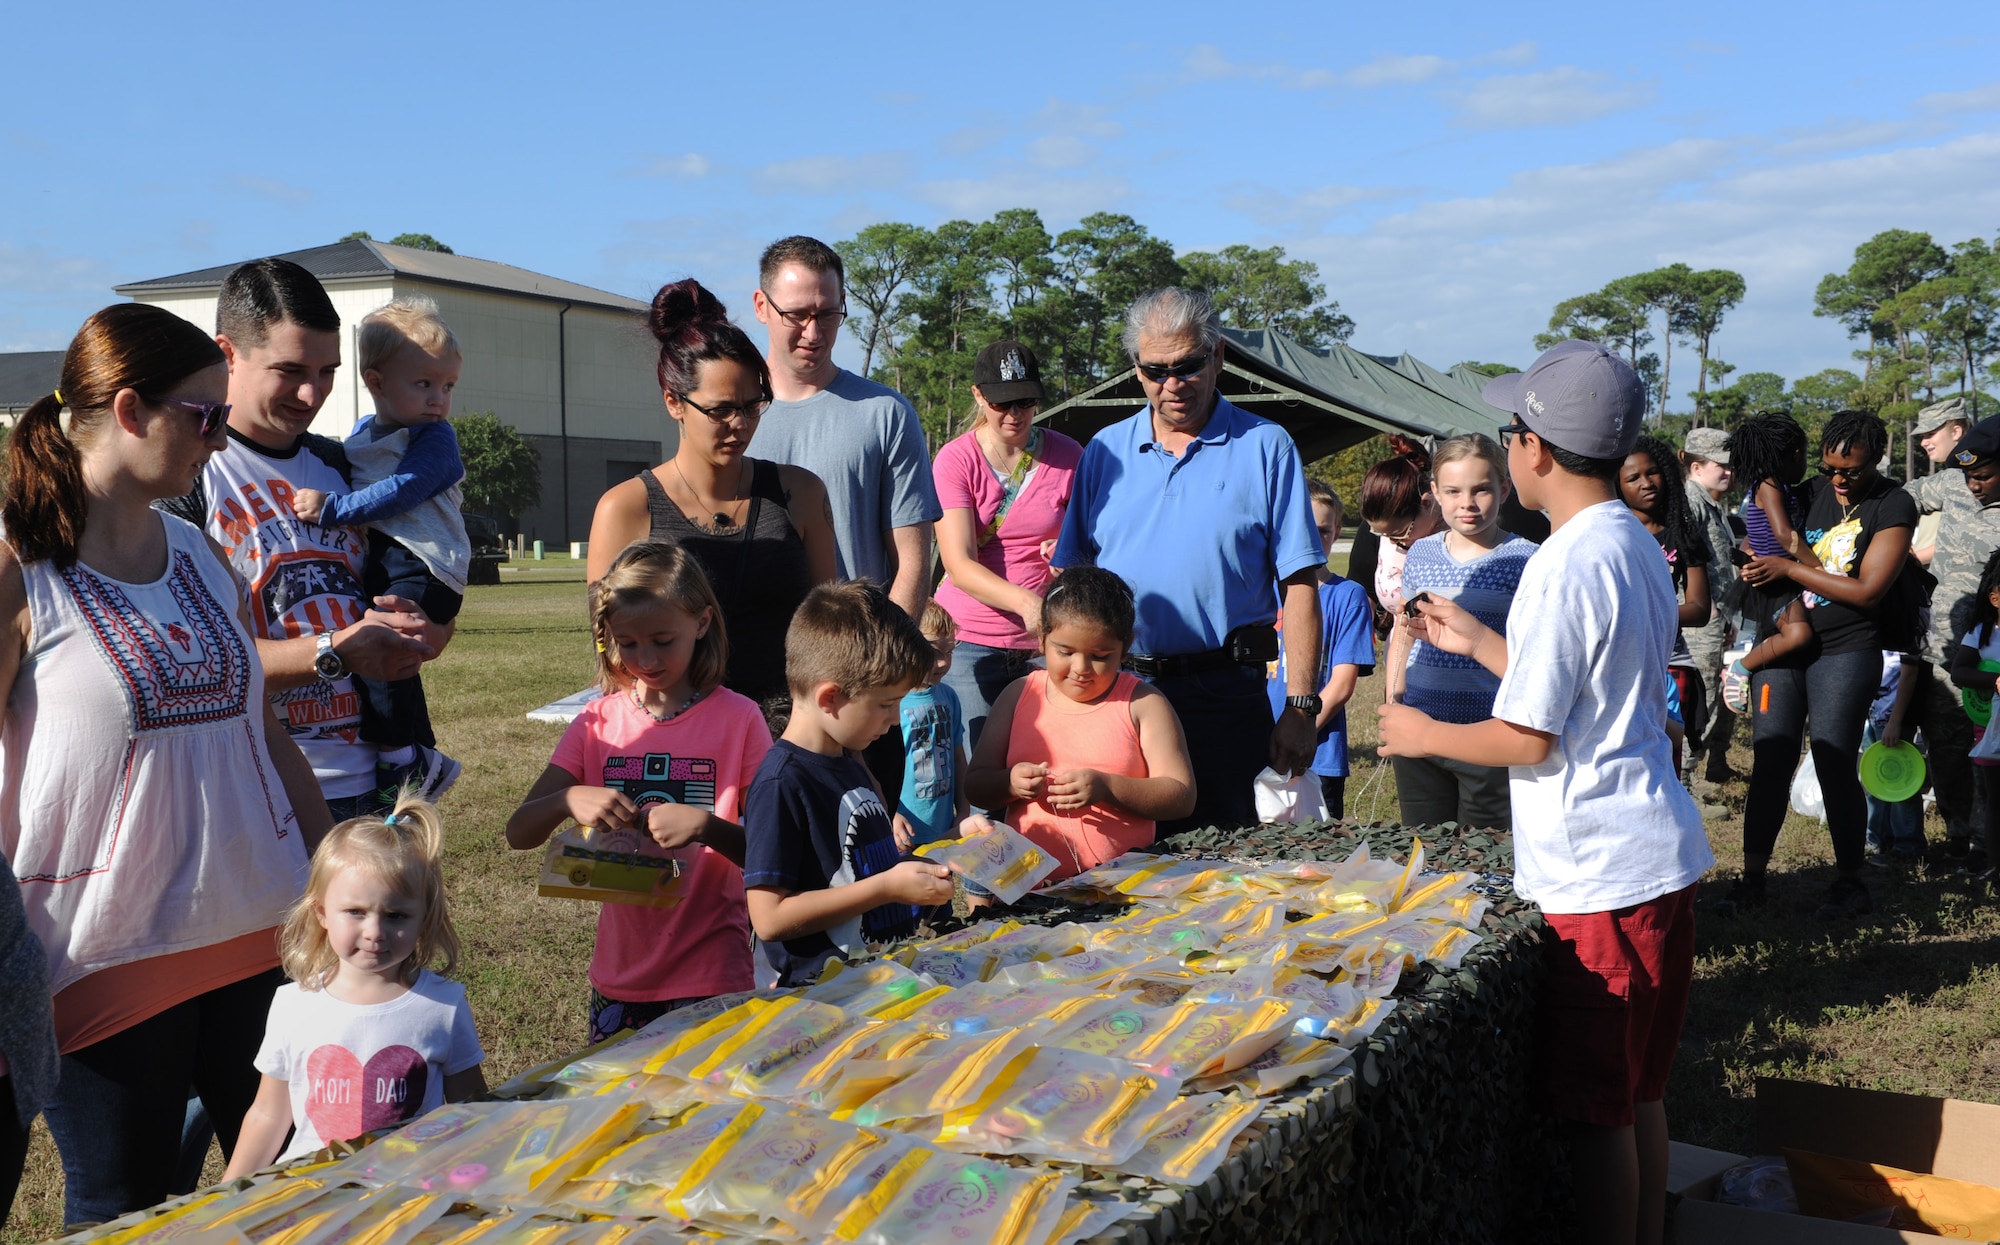 Keesler families process through a deployment line during Operation Hero Oct. 15, 2016, on Keesler Air Force Base, Miss. The event was designed to help children better understand what their parents do when they deploy. (U.S. Air Force photo by Kemberly Groue/Released)